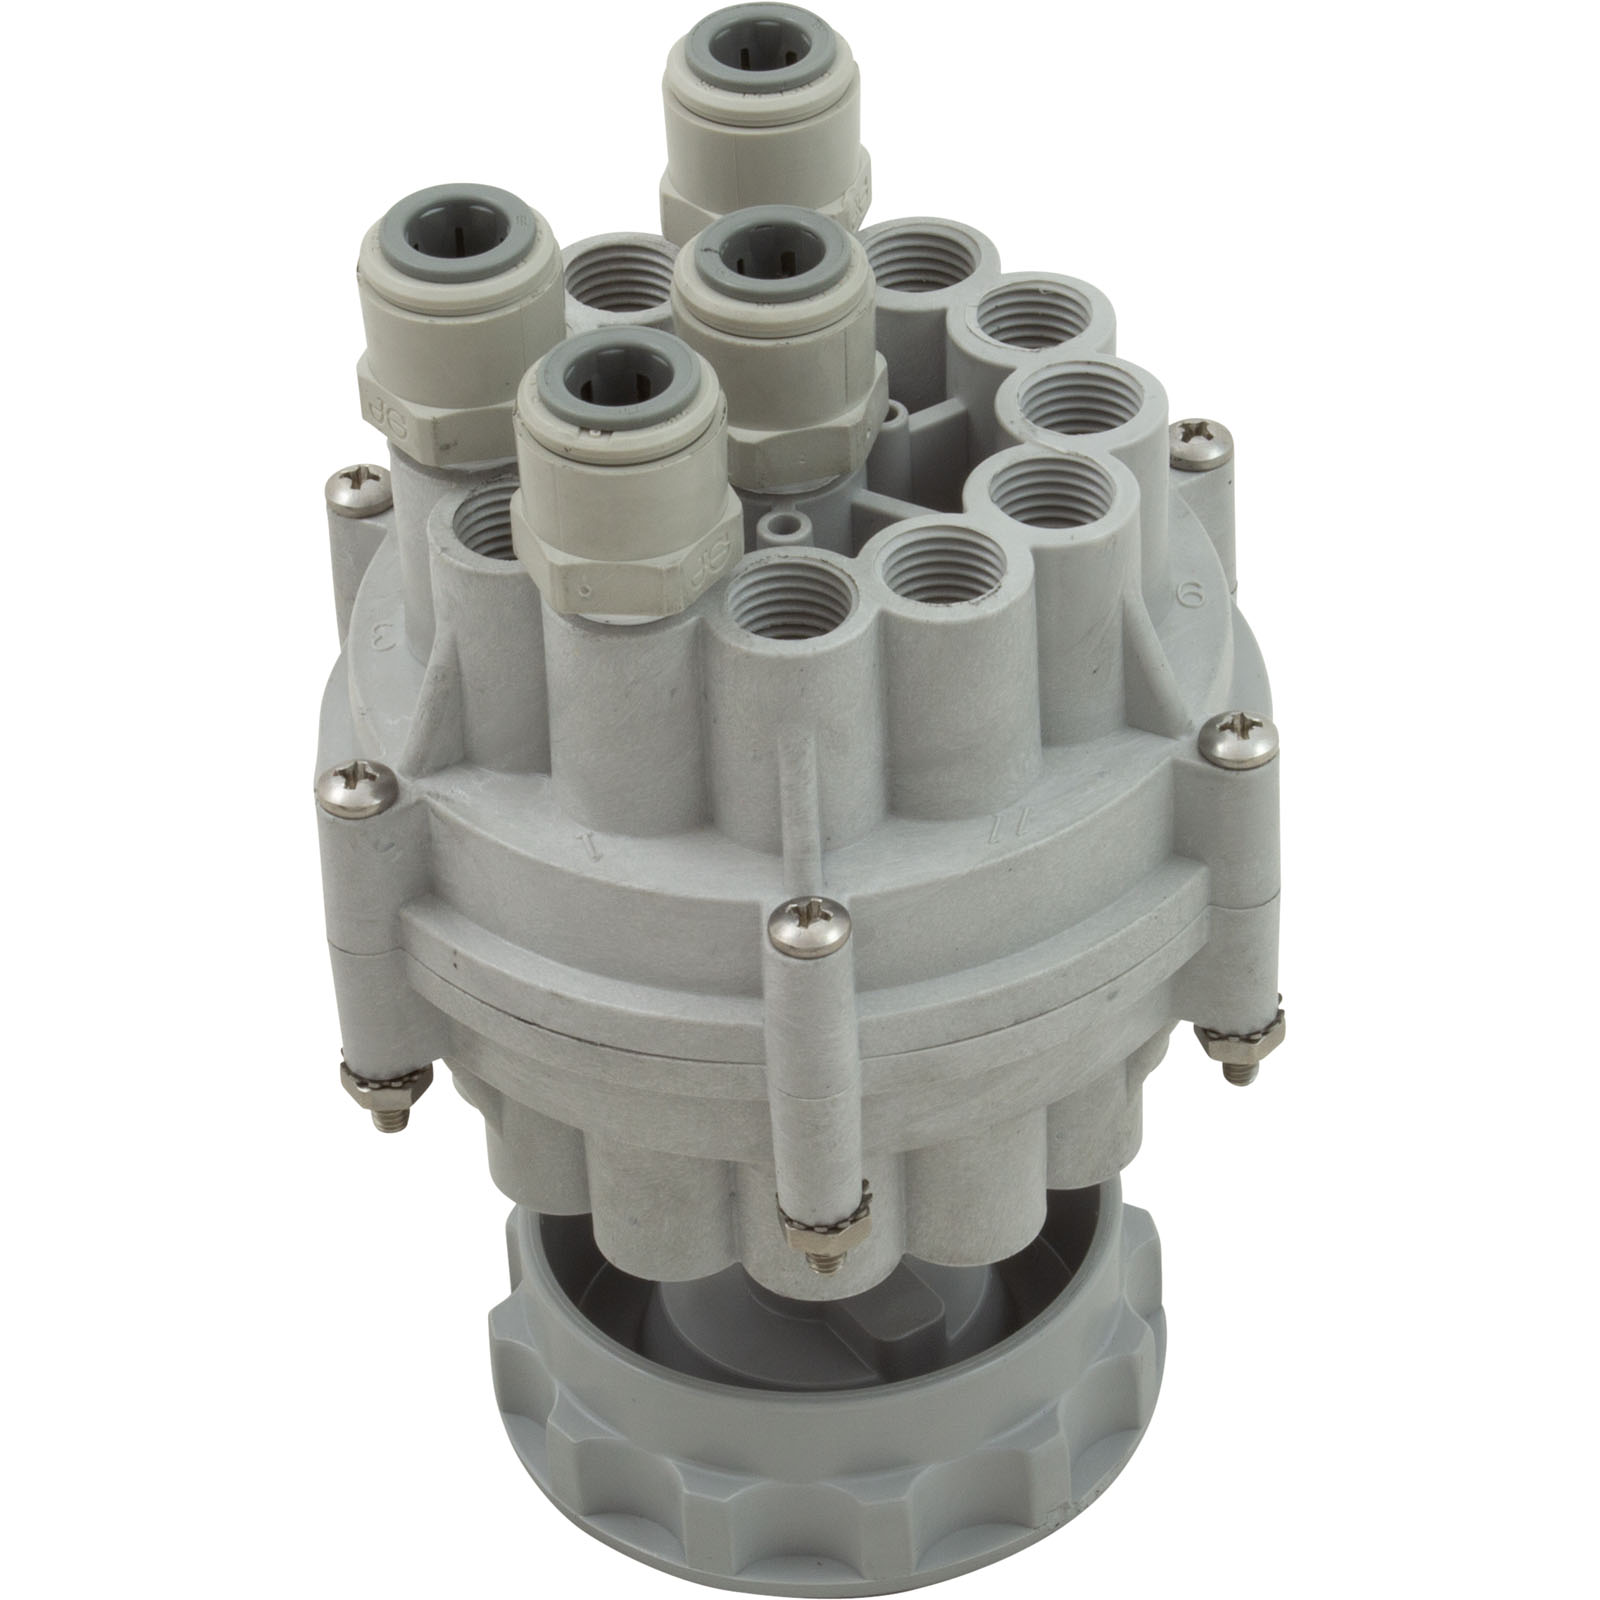 Picture of MV250-02 Multiport Valve Paragon Stark for 02 Tank System